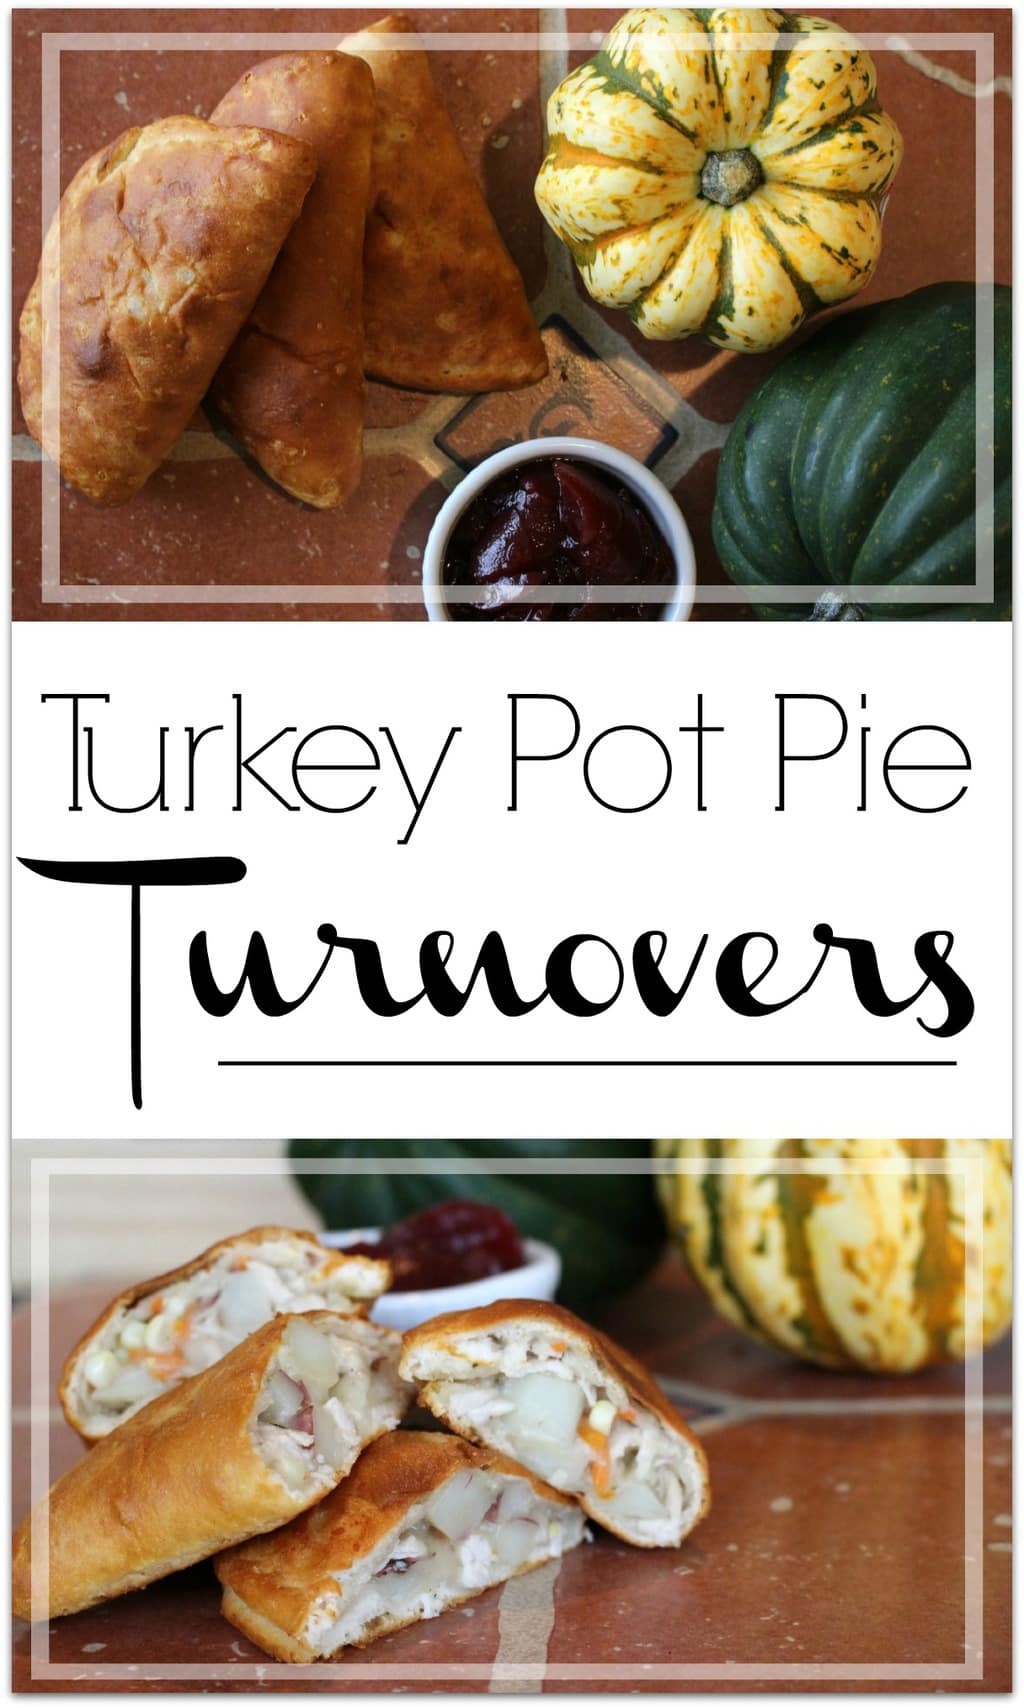 This recipe for turkey pot pie turnovers is just what you need to change up those Thanksgiving dinner leftovers! Don't let any of that turkey go to waste! These would make a great appetizer for a tailgate, too! 